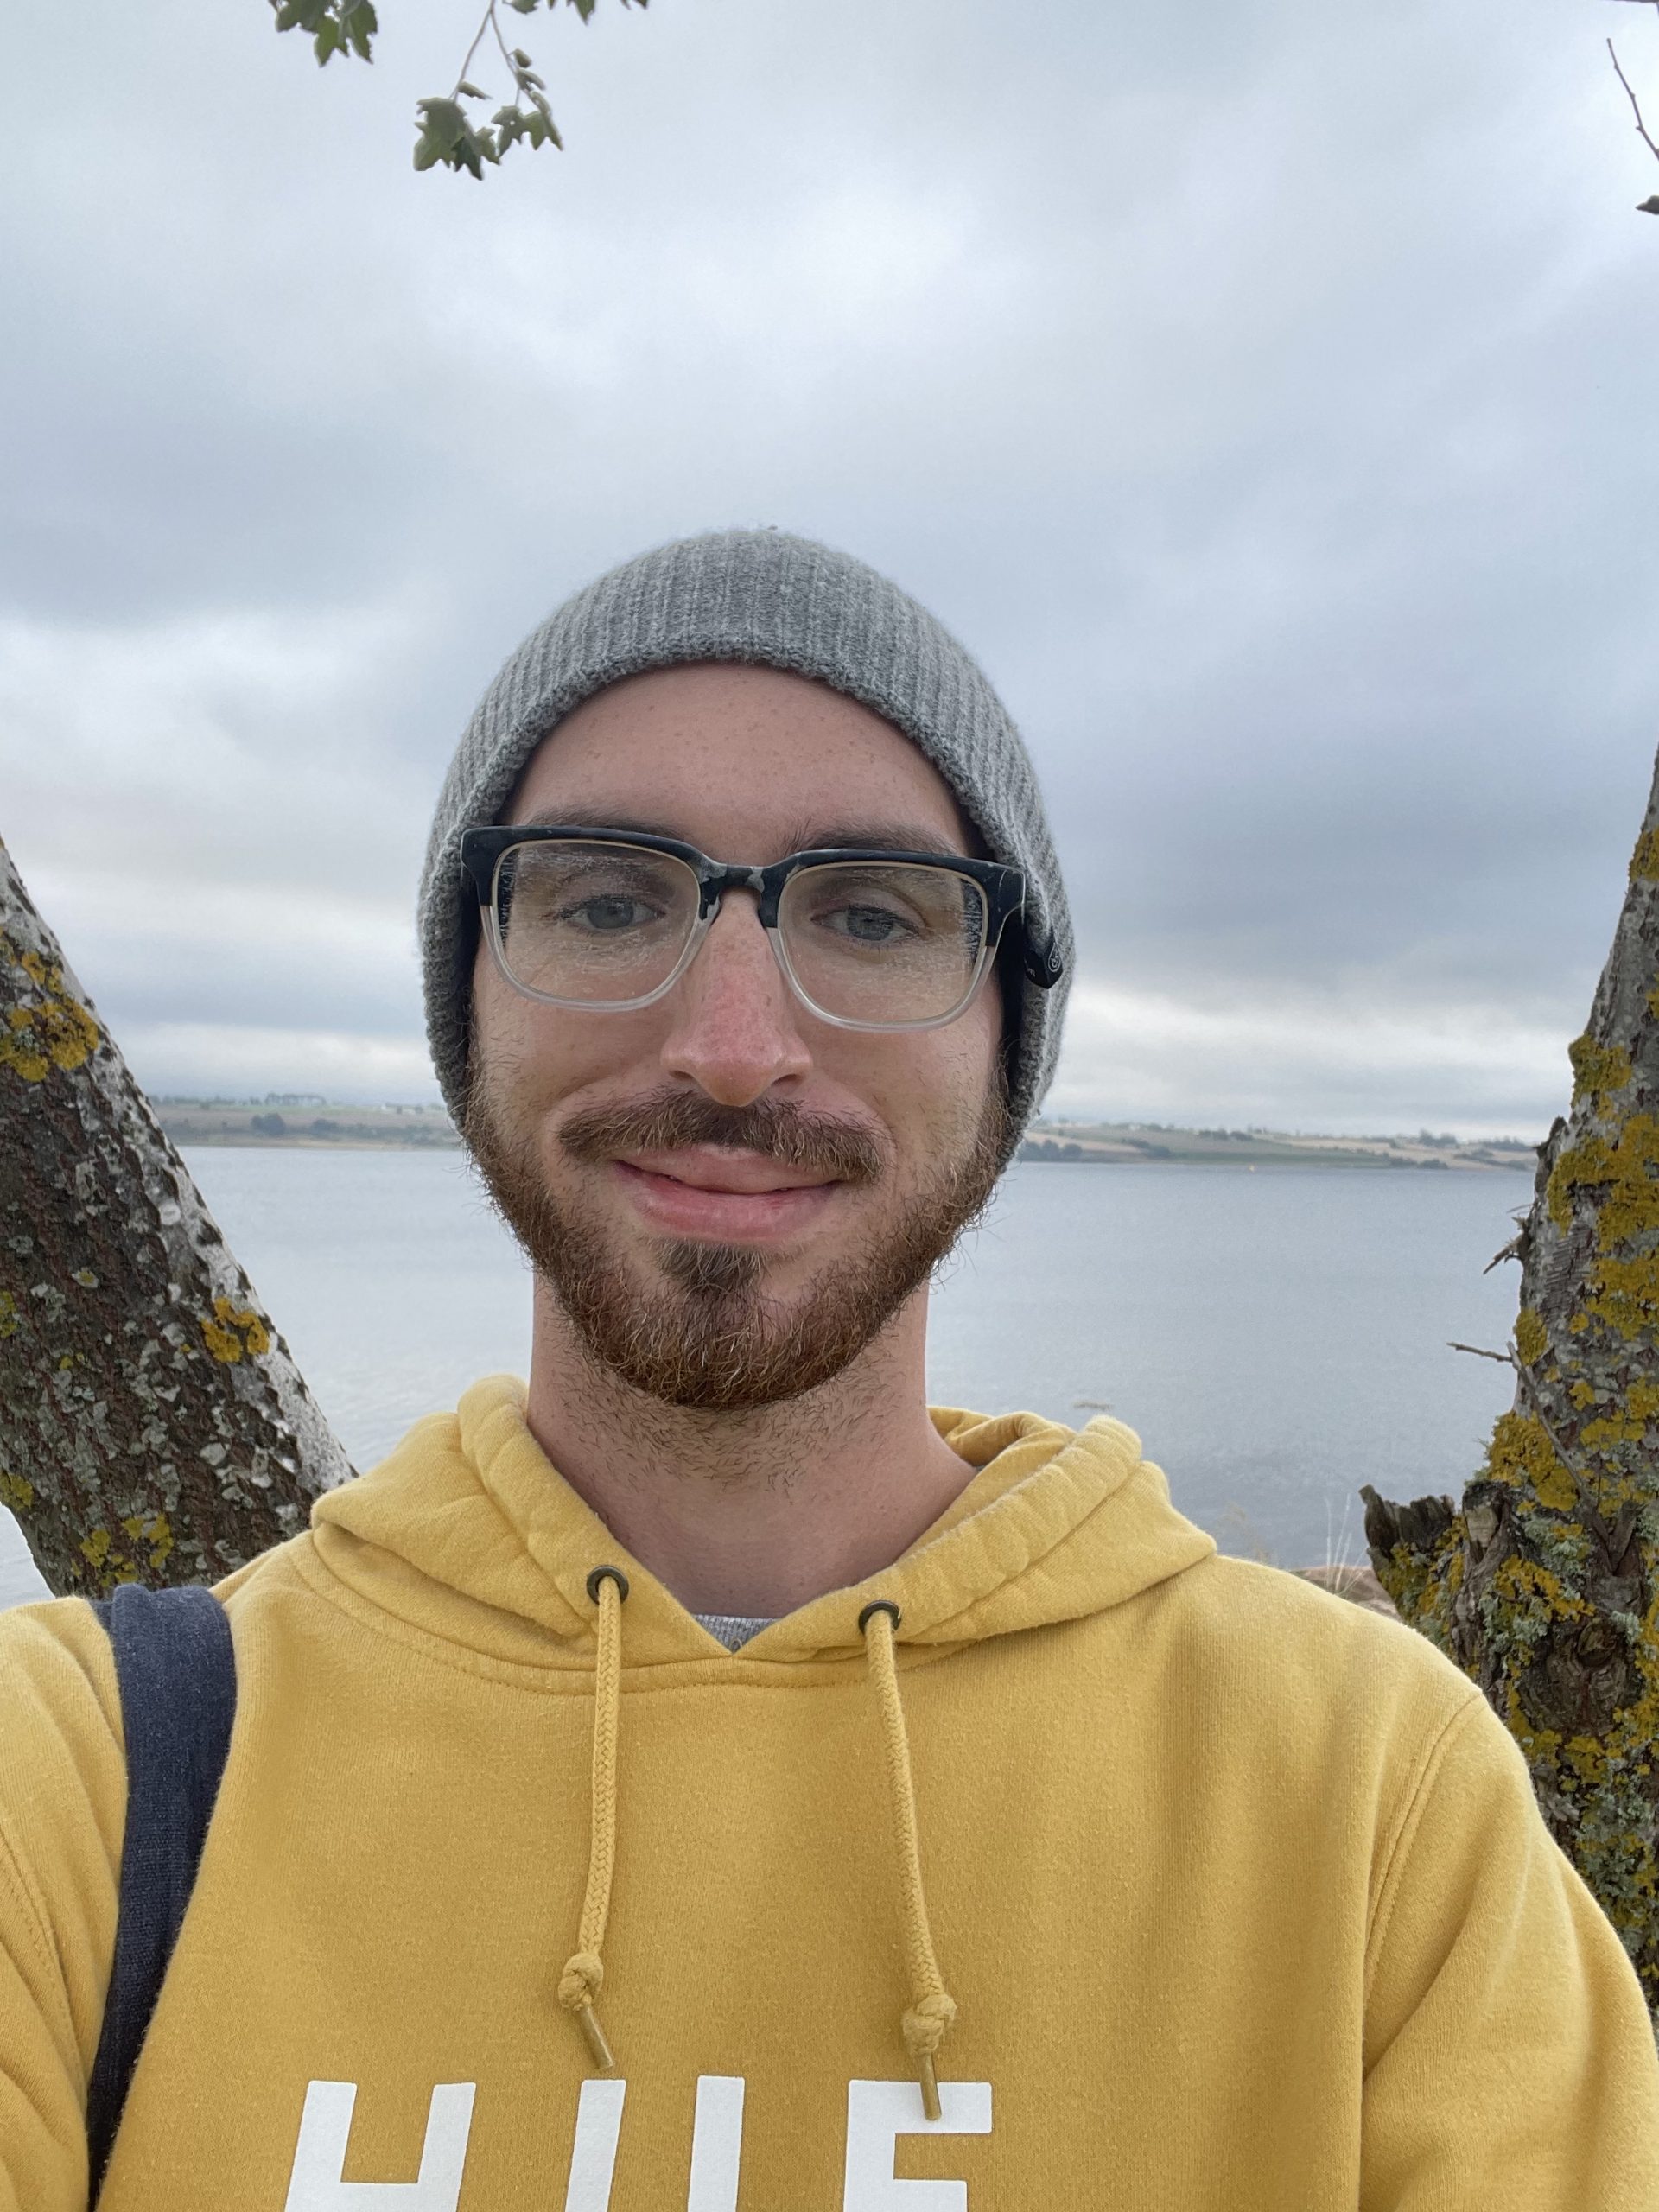 Jason Walker, wearing a yellow sweatshirt, grey beanie, and glasses, stands in front of open water.